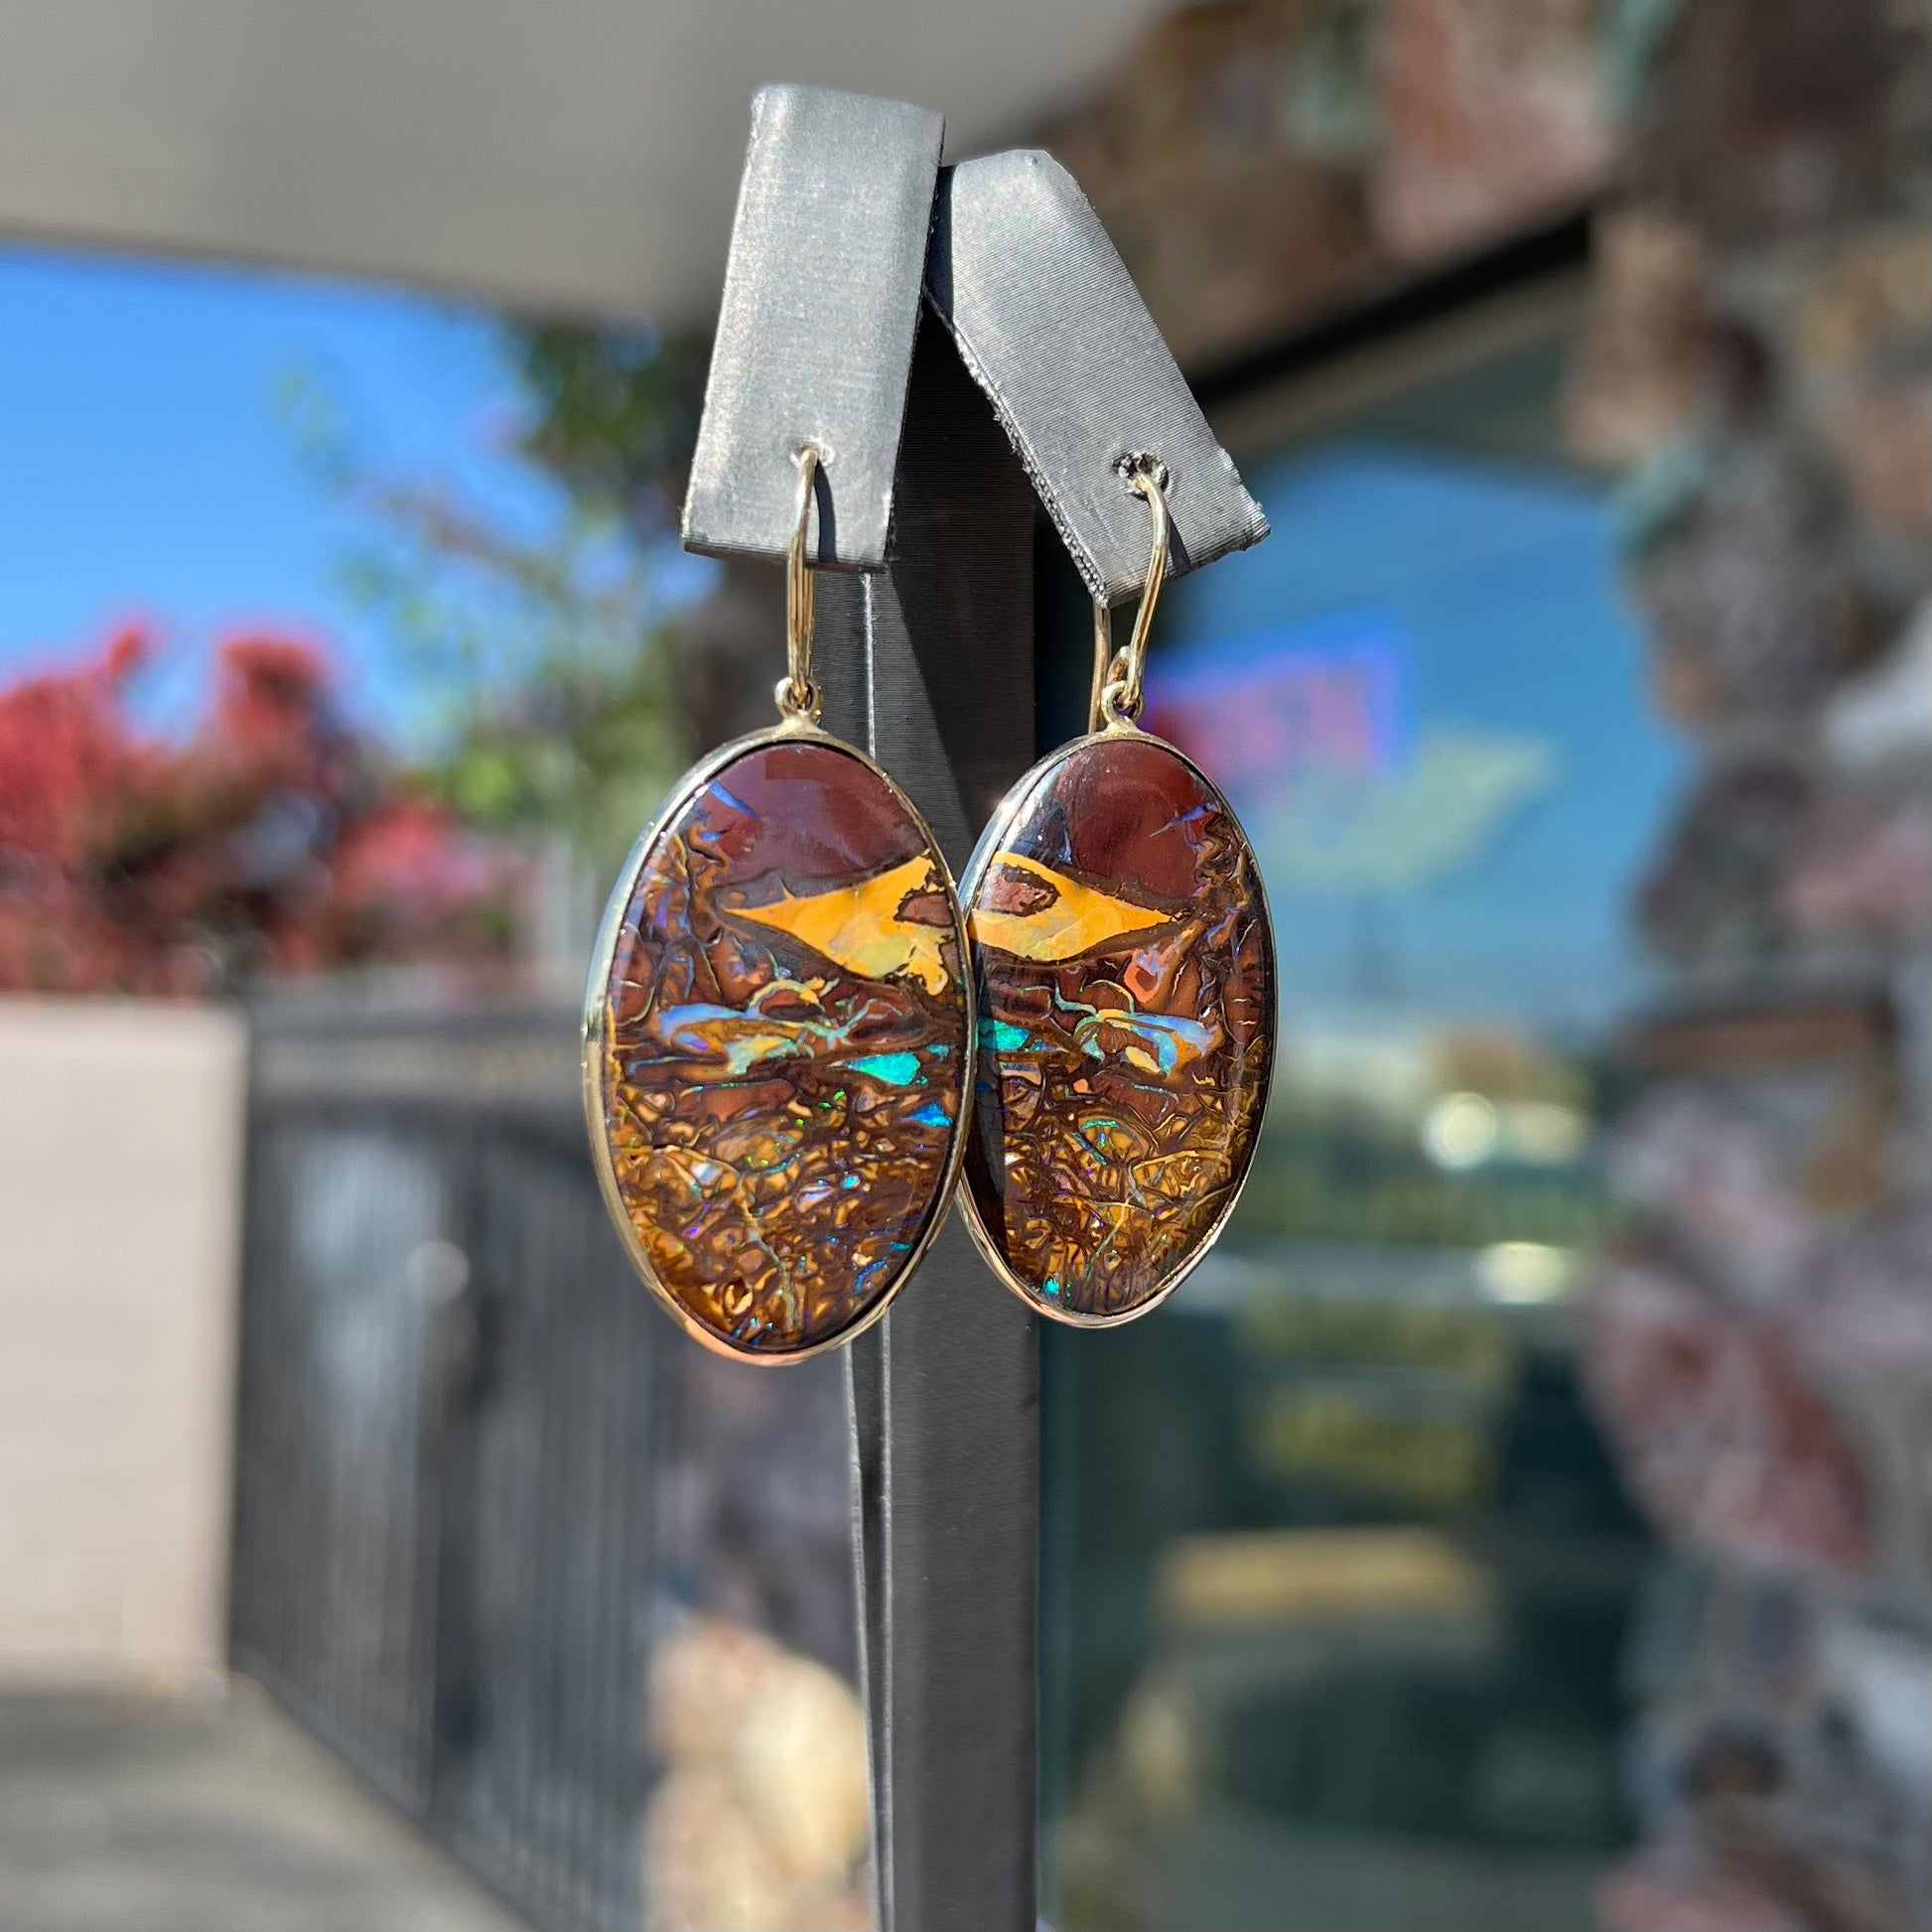 A pair of oval cut Koroit boulder opal dangle earrings in yellow gold bezel frames.  The opal exhibits a unique pattern and blue colors.